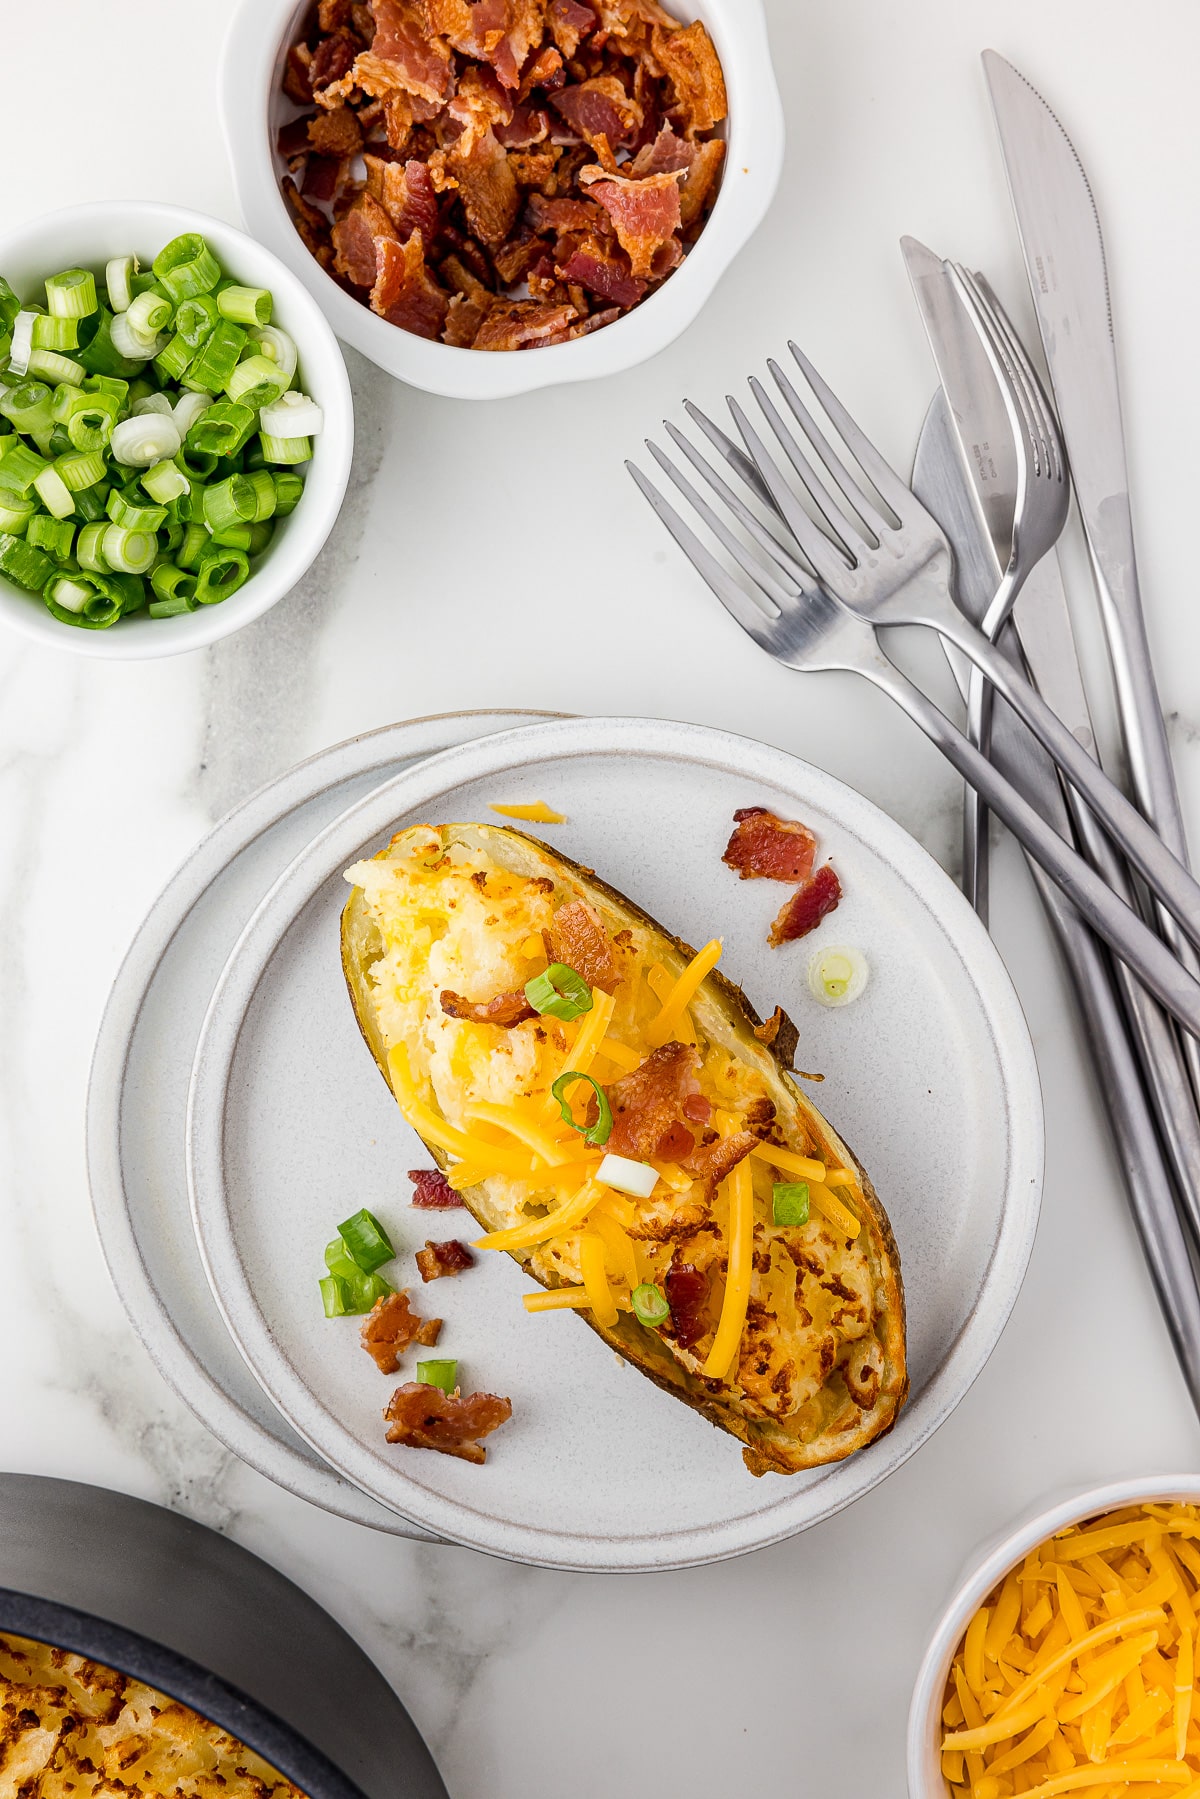 Twice baked potato on a white plate with forks and three knives on a white marble counter with a bowl of bacon bits, a bowl of sliced green onions, and a bowl of shredded cheddar cheese